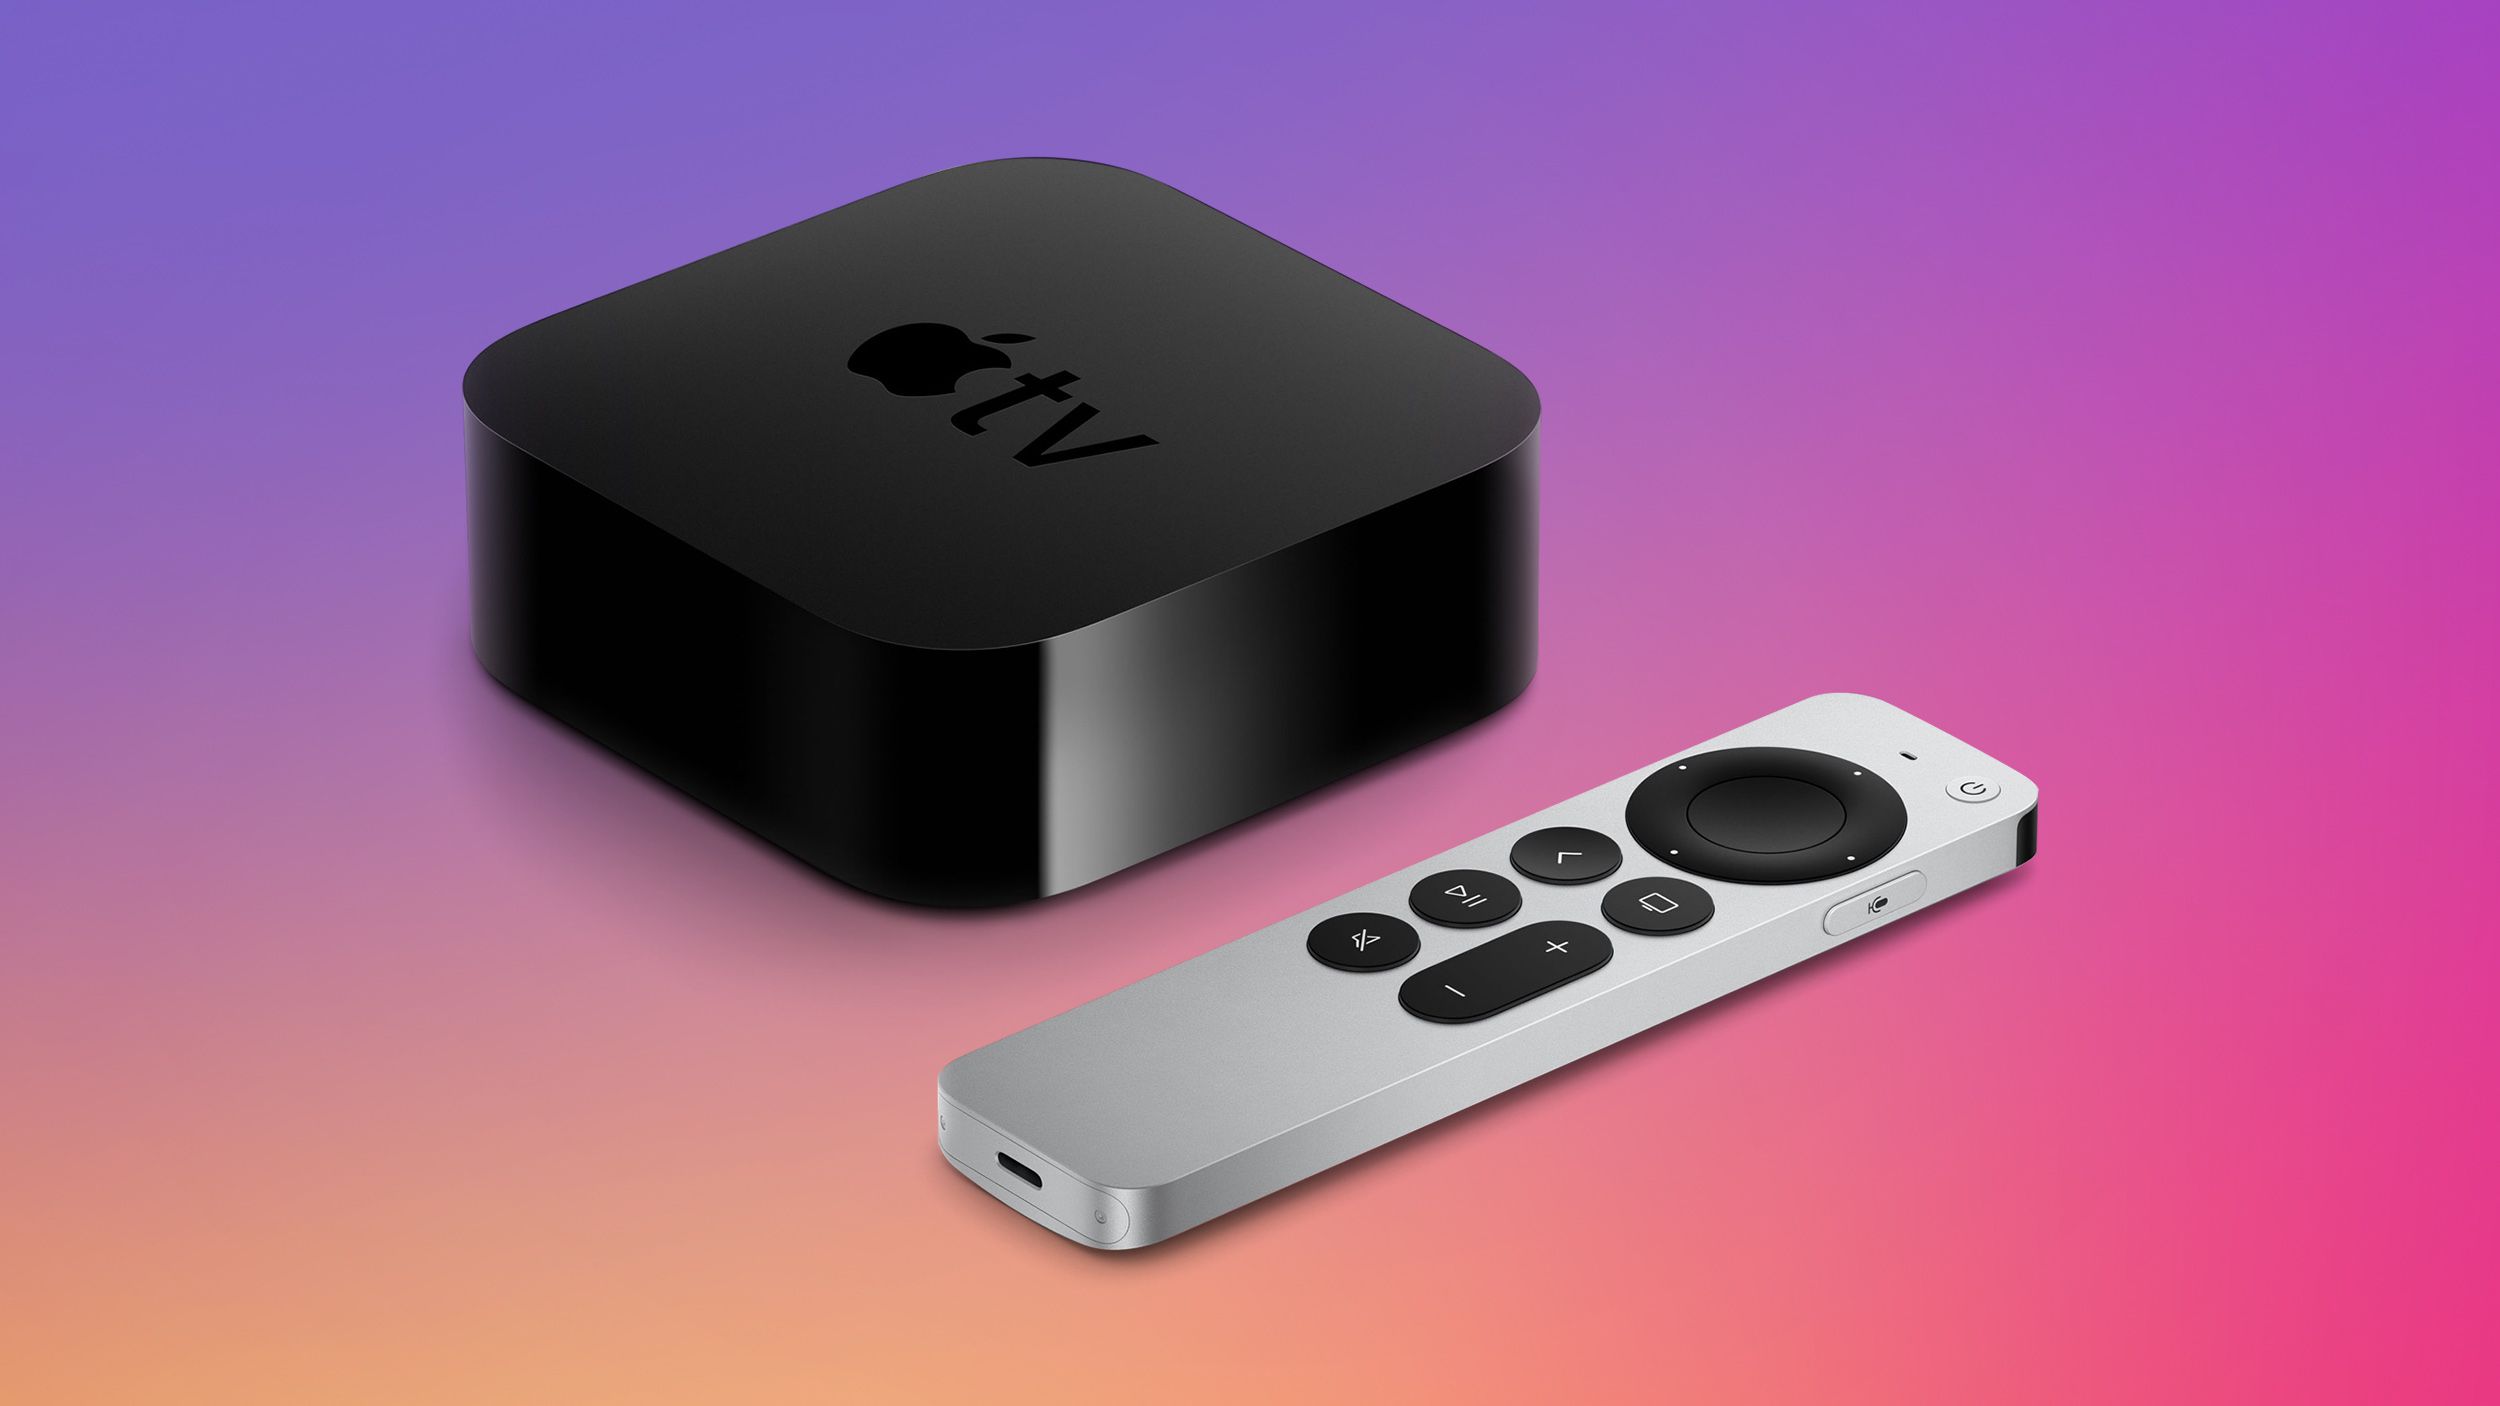 What's New in tvOS 16 for Apple TV: Features and Enhancements - MacRumors